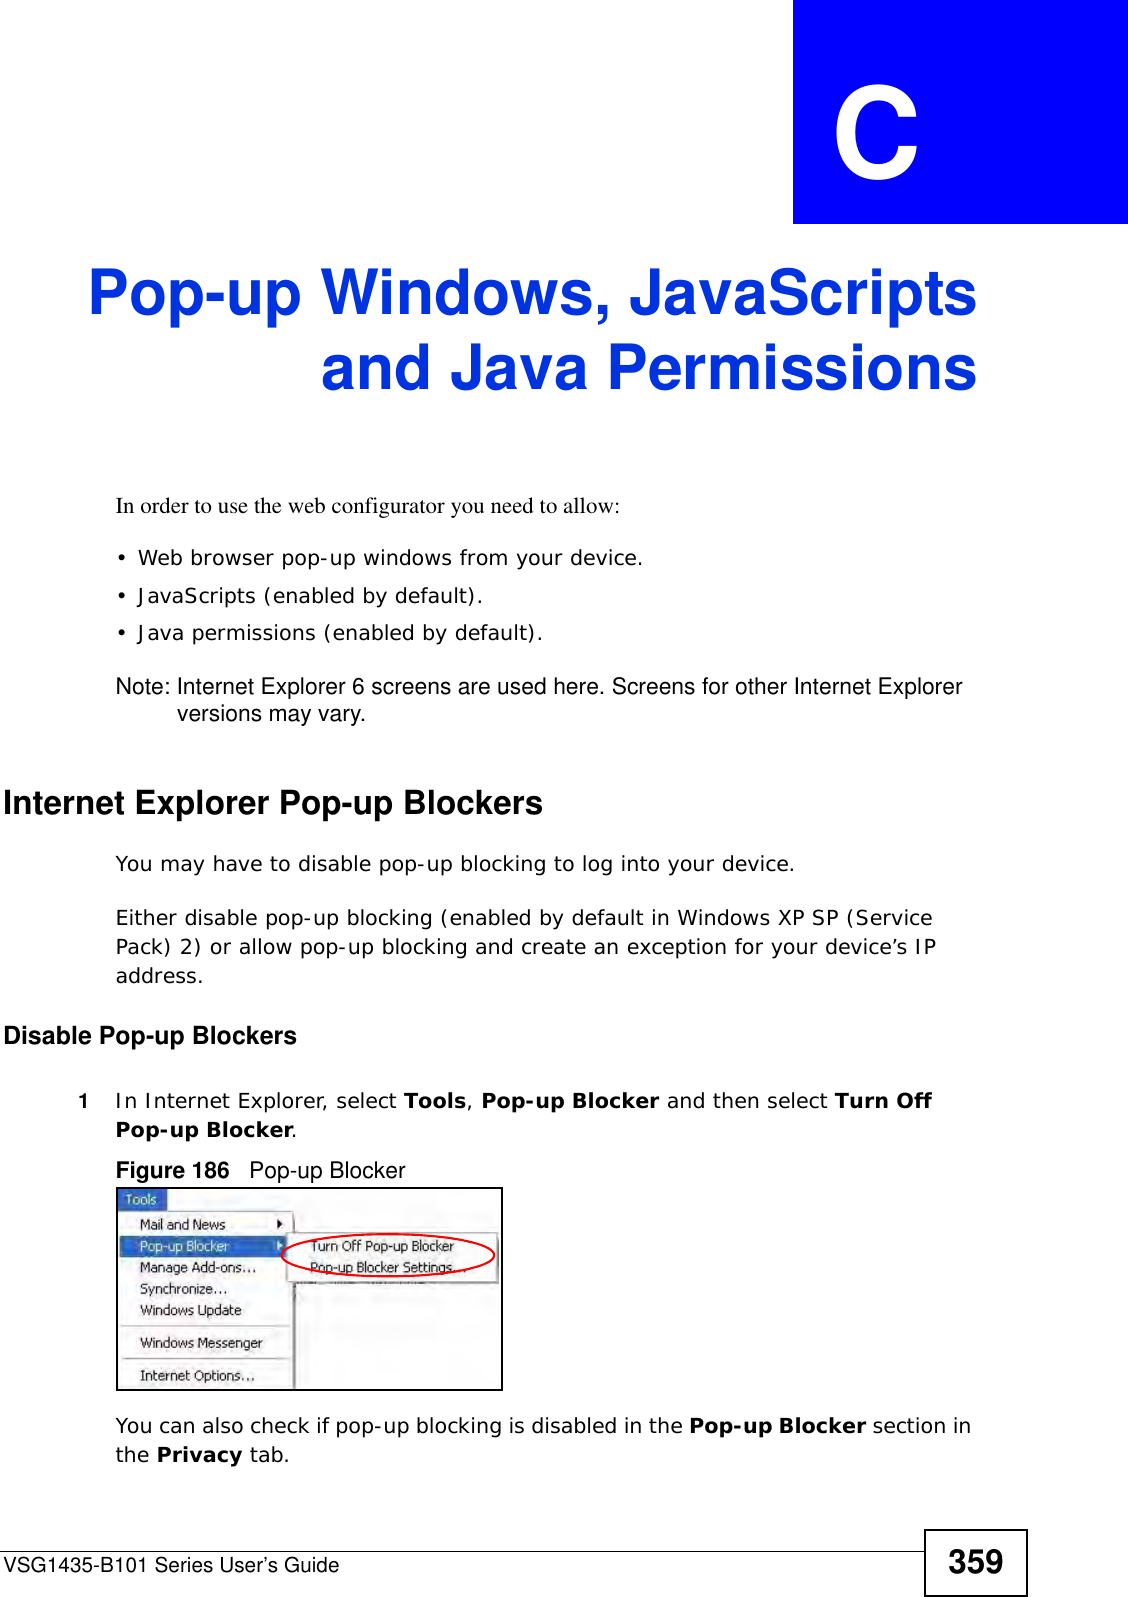 VSG1435-B101 Series User’s Guide 359APPENDIX  C Pop-up Windows, JavaScriptsand Java PermissionsIn order to use the web configurator you need to allow:• Web browser pop-up windows from your device.• JavaScripts (enabled by default).• Java permissions (enabled by default).Note: Internet Explorer 6 screens are used here. Screens for other Internet Explorer versions may vary.Internet Explorer Pop-up BlockersYou may have to disable pop-up blocking to log into your device. Either disable pop-up blocking (enabled by default in Windows XP SP (Service Pack) 2) or allow pop-up blocking and create an exception for your device’s IP address.Disable Pop-up Blockers1In Internet Explorer, select Tools, Pop-up Blocker and then select Turn Off Pop-up Blocker. Figure 186   Pop-up BlockerYou can also check if pop-up blocking is disabled in the Pop-up Blocker section in the Privacy tab. 